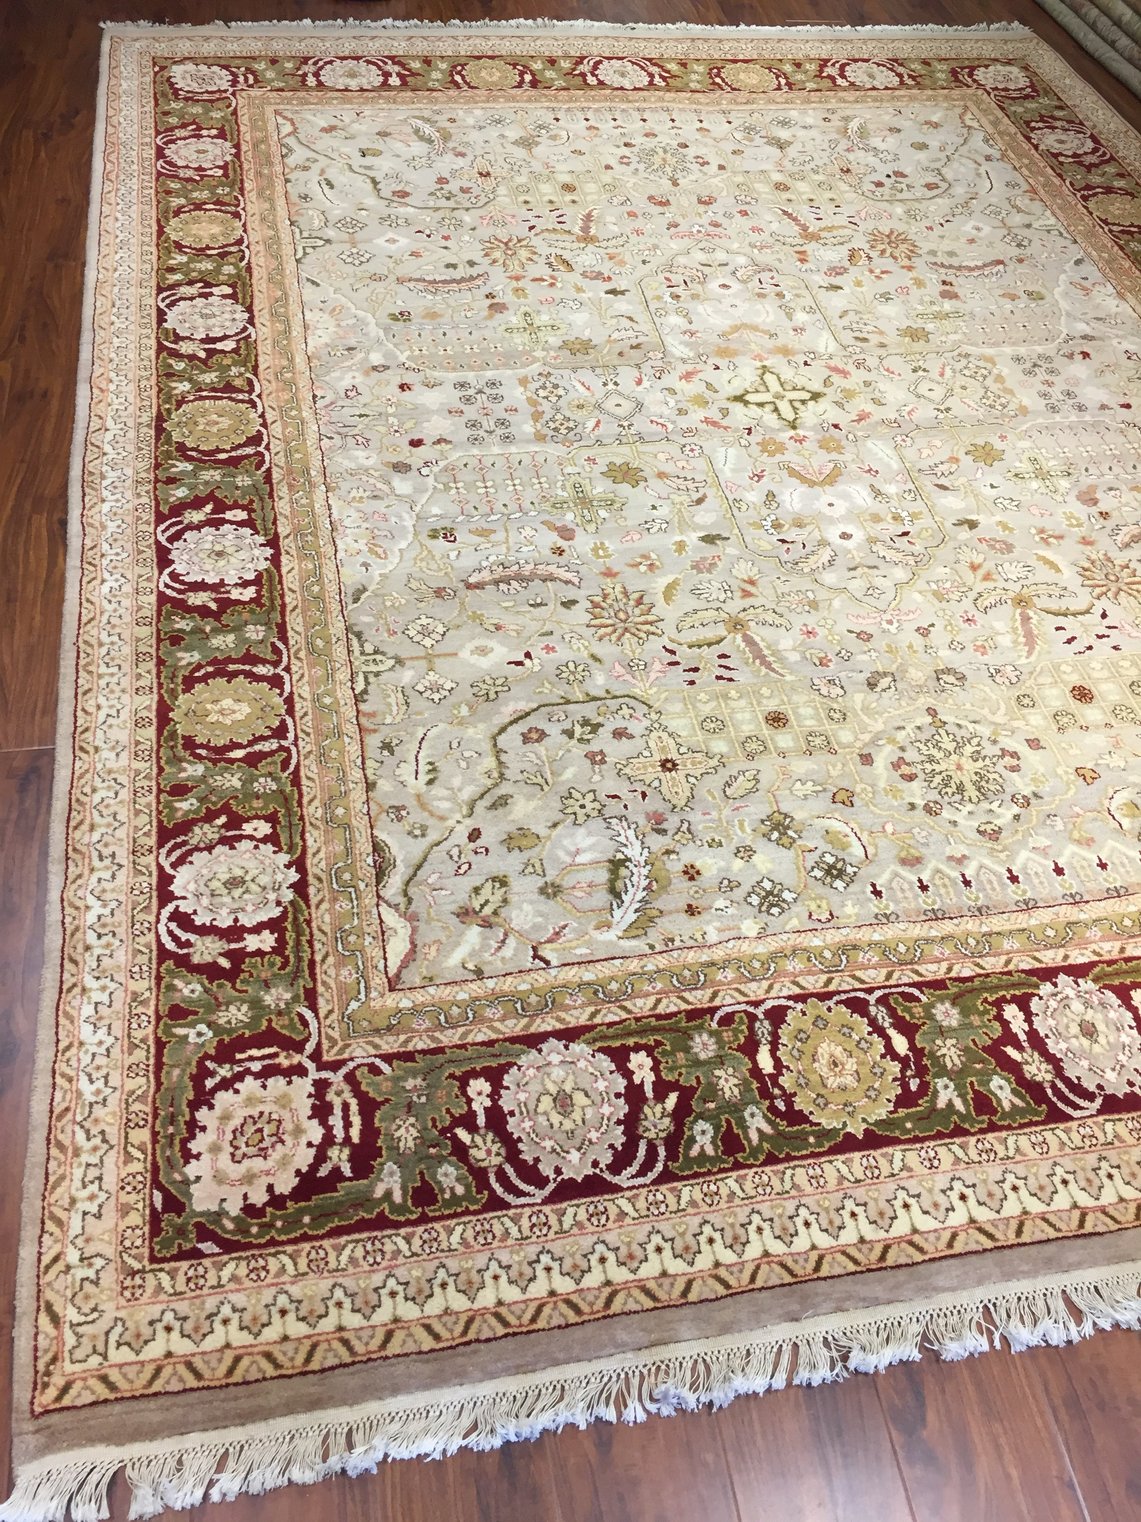 Authentic Handmade fine Indiaian Rug-Wool Floral Pattern-Light Olive/Burgundy-(8 by 10.2 Feet)